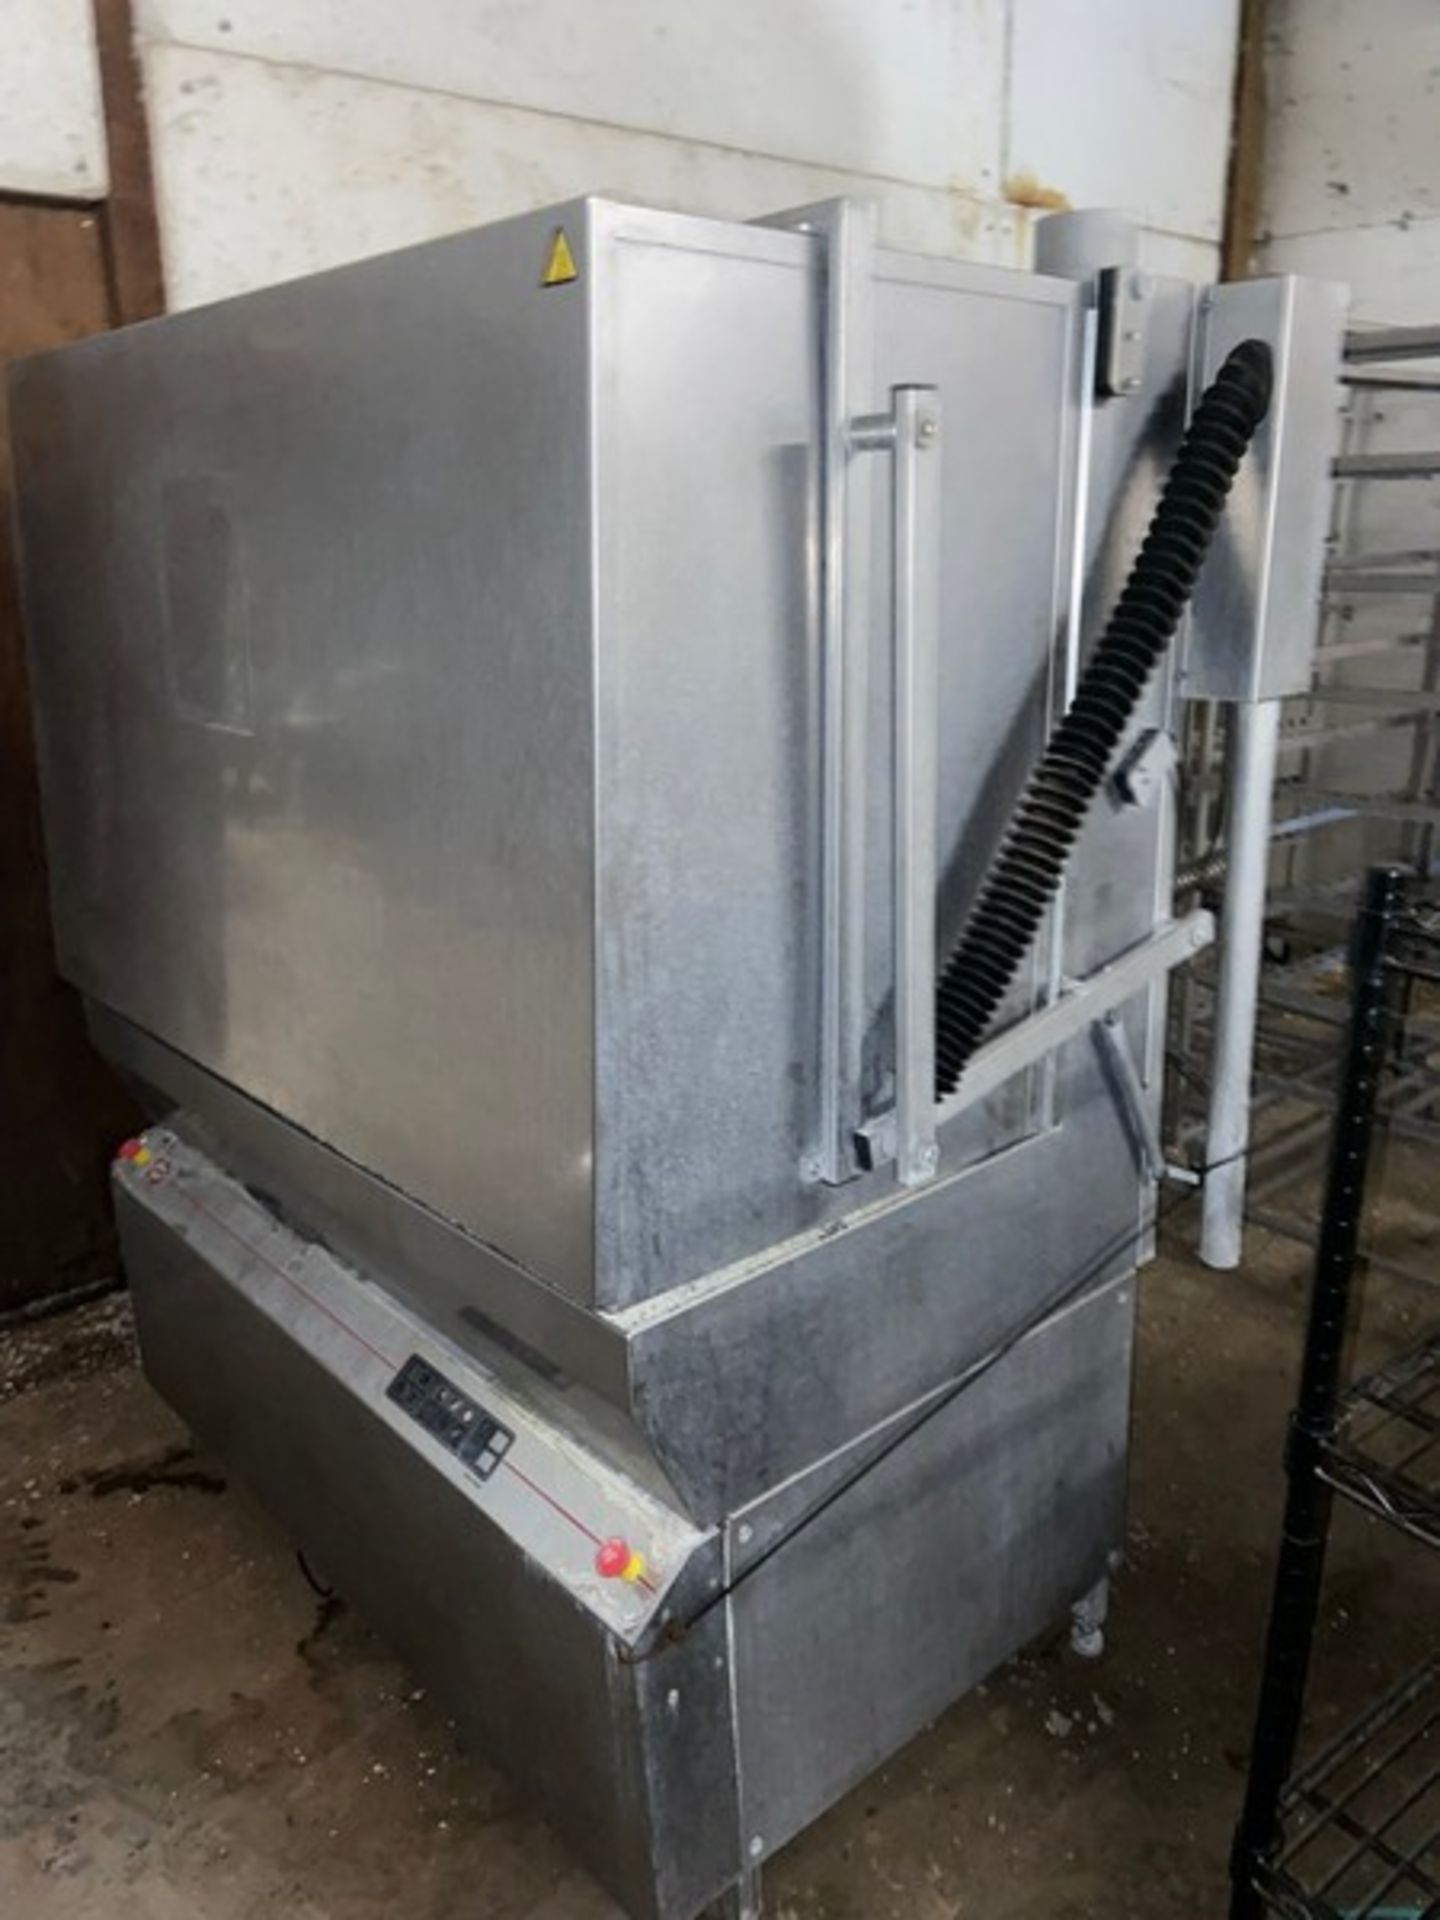 Jeros S/S Fully Automated Cleaning Machine (LOCATED IN LITTLESTOWN, PA) - Image 4 of 6